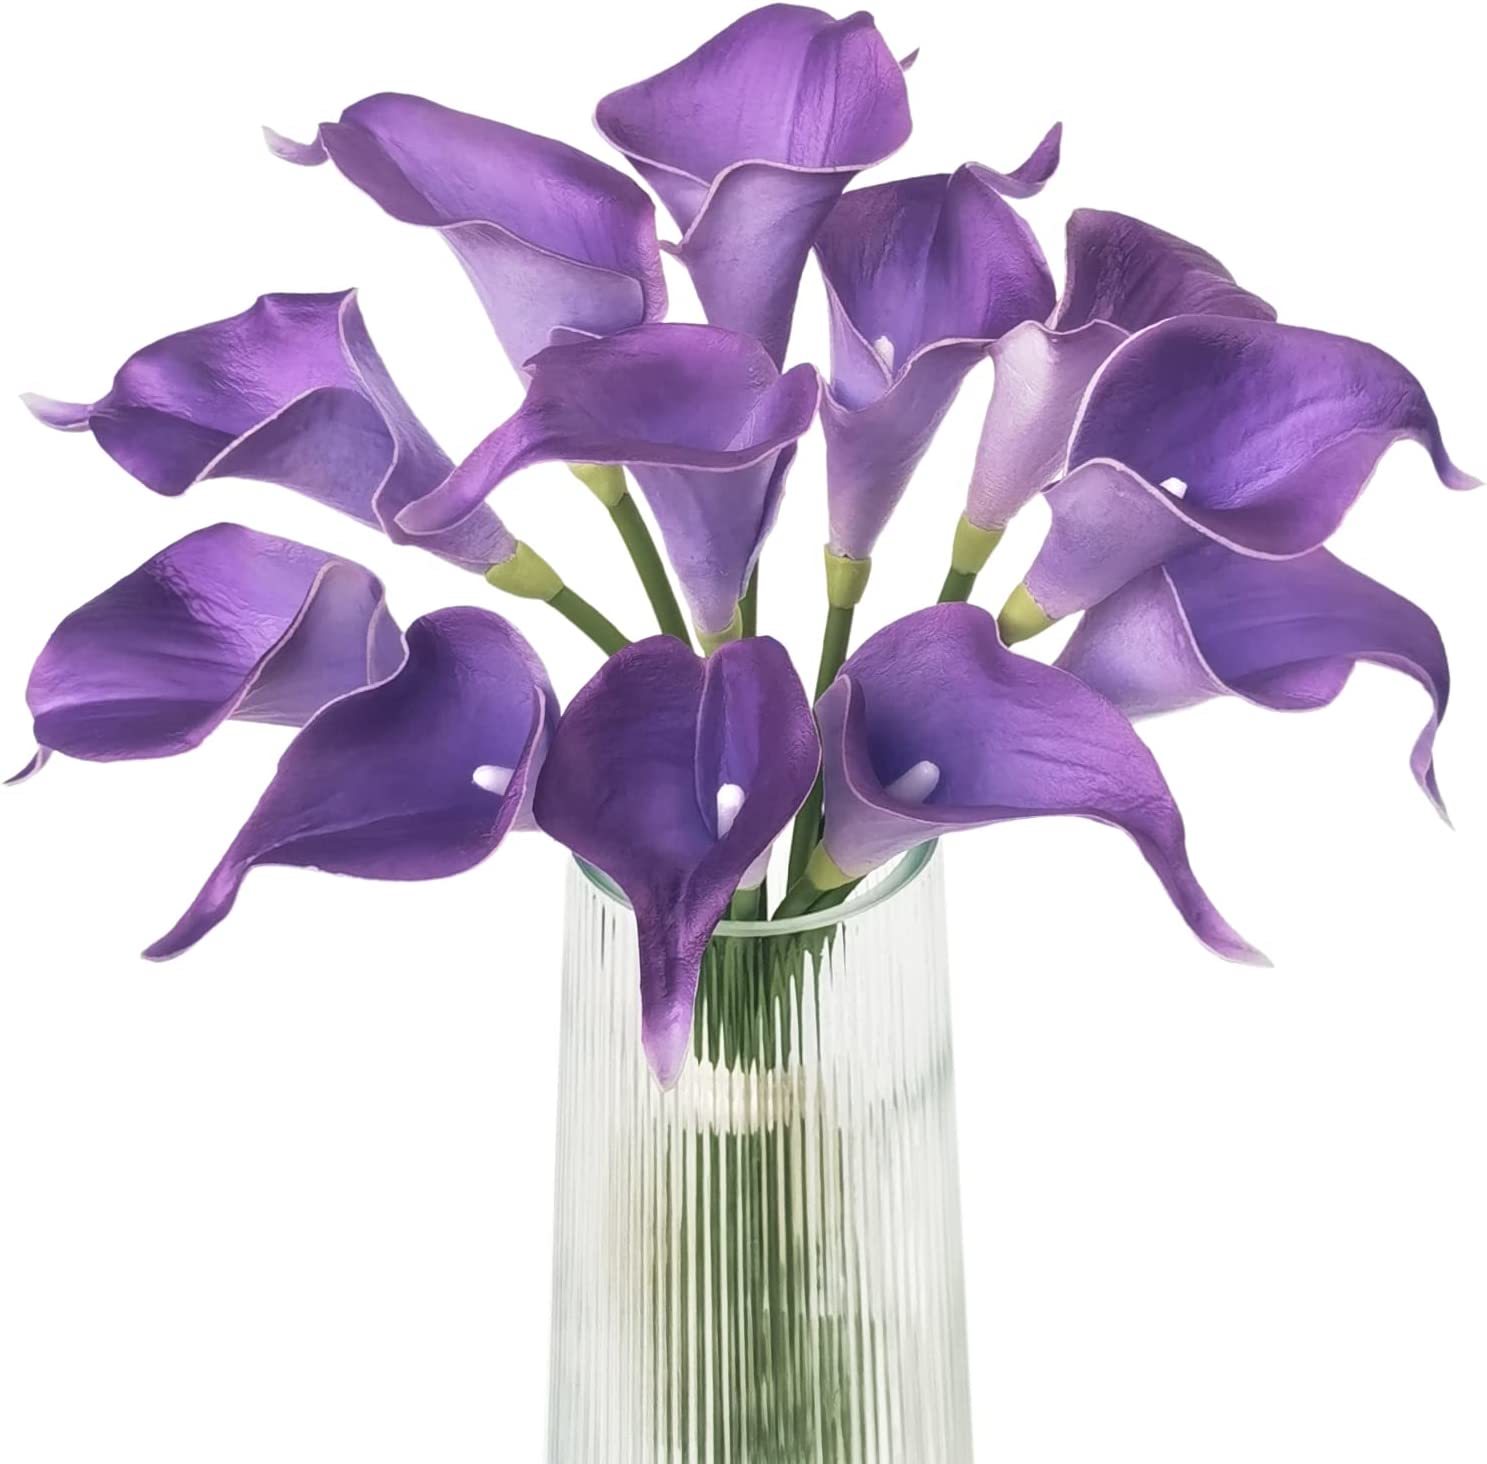 Primary image for 12 Pcs. Table Flower Decor Faux Calla Lily Bouquet For Wedding Bride Shower Home